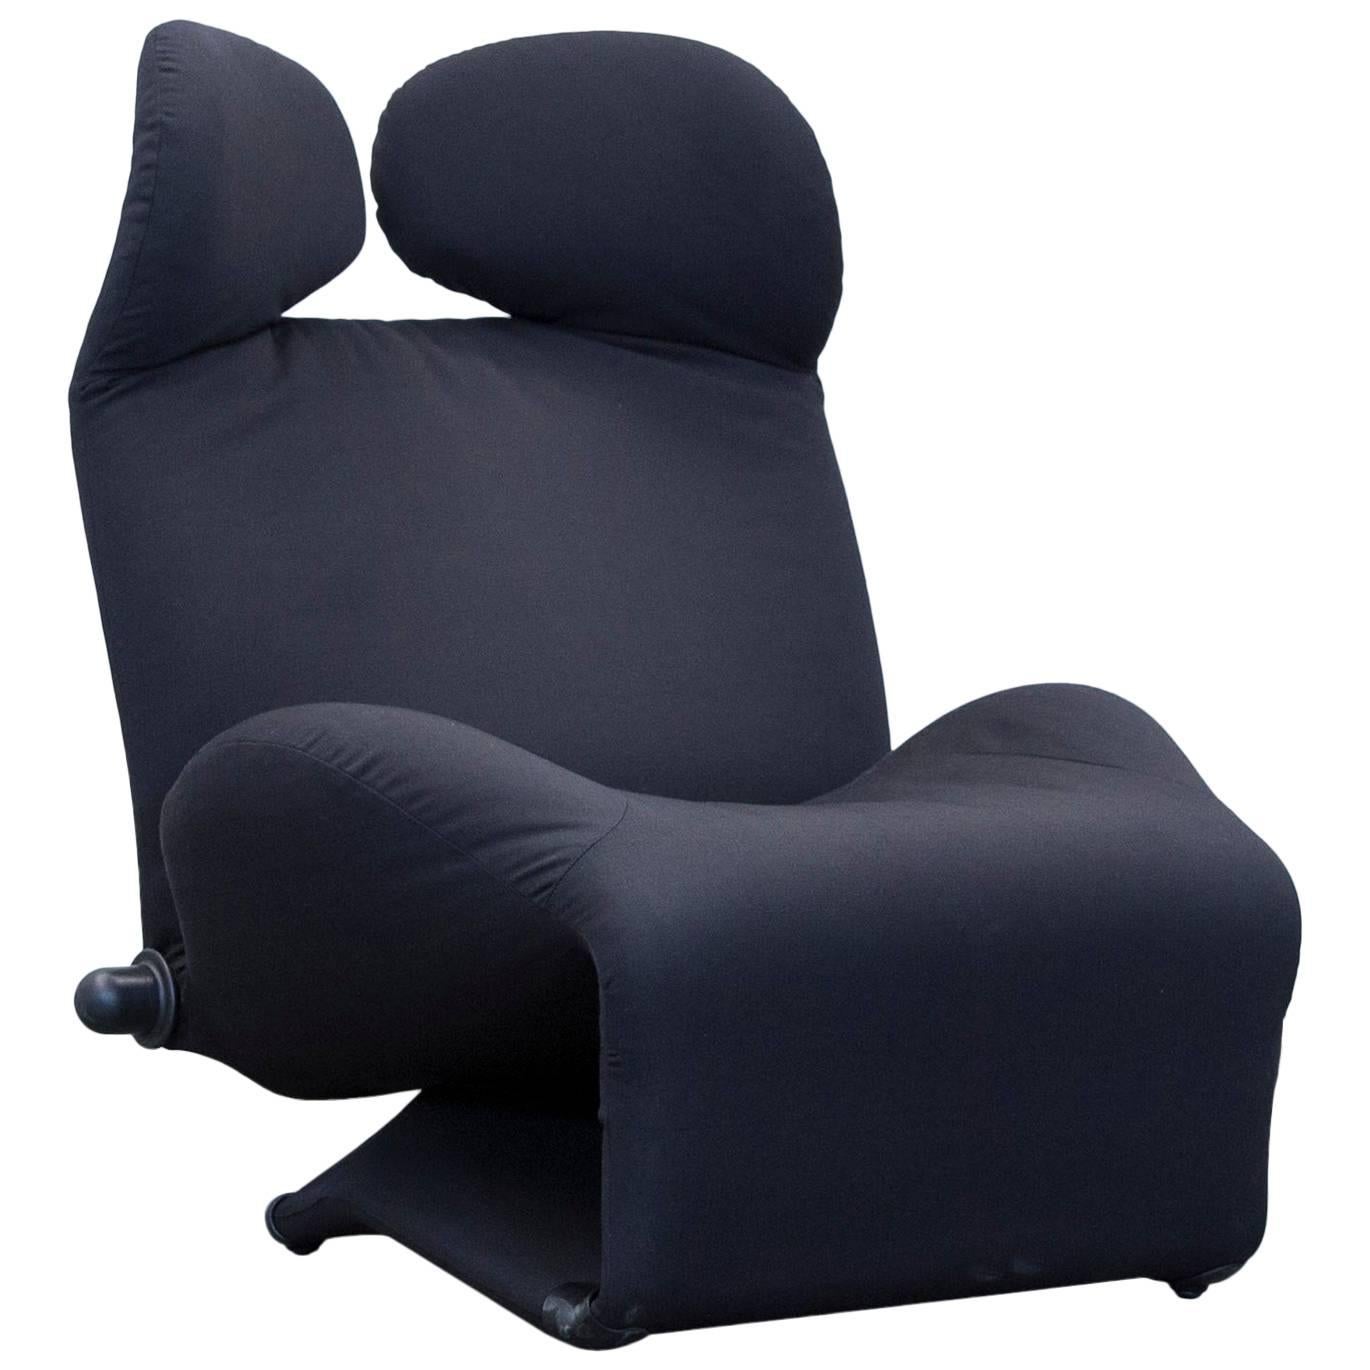 Cassina Wink Designer Armchair Fabric Black One Seat Couch Function Modern For Sale